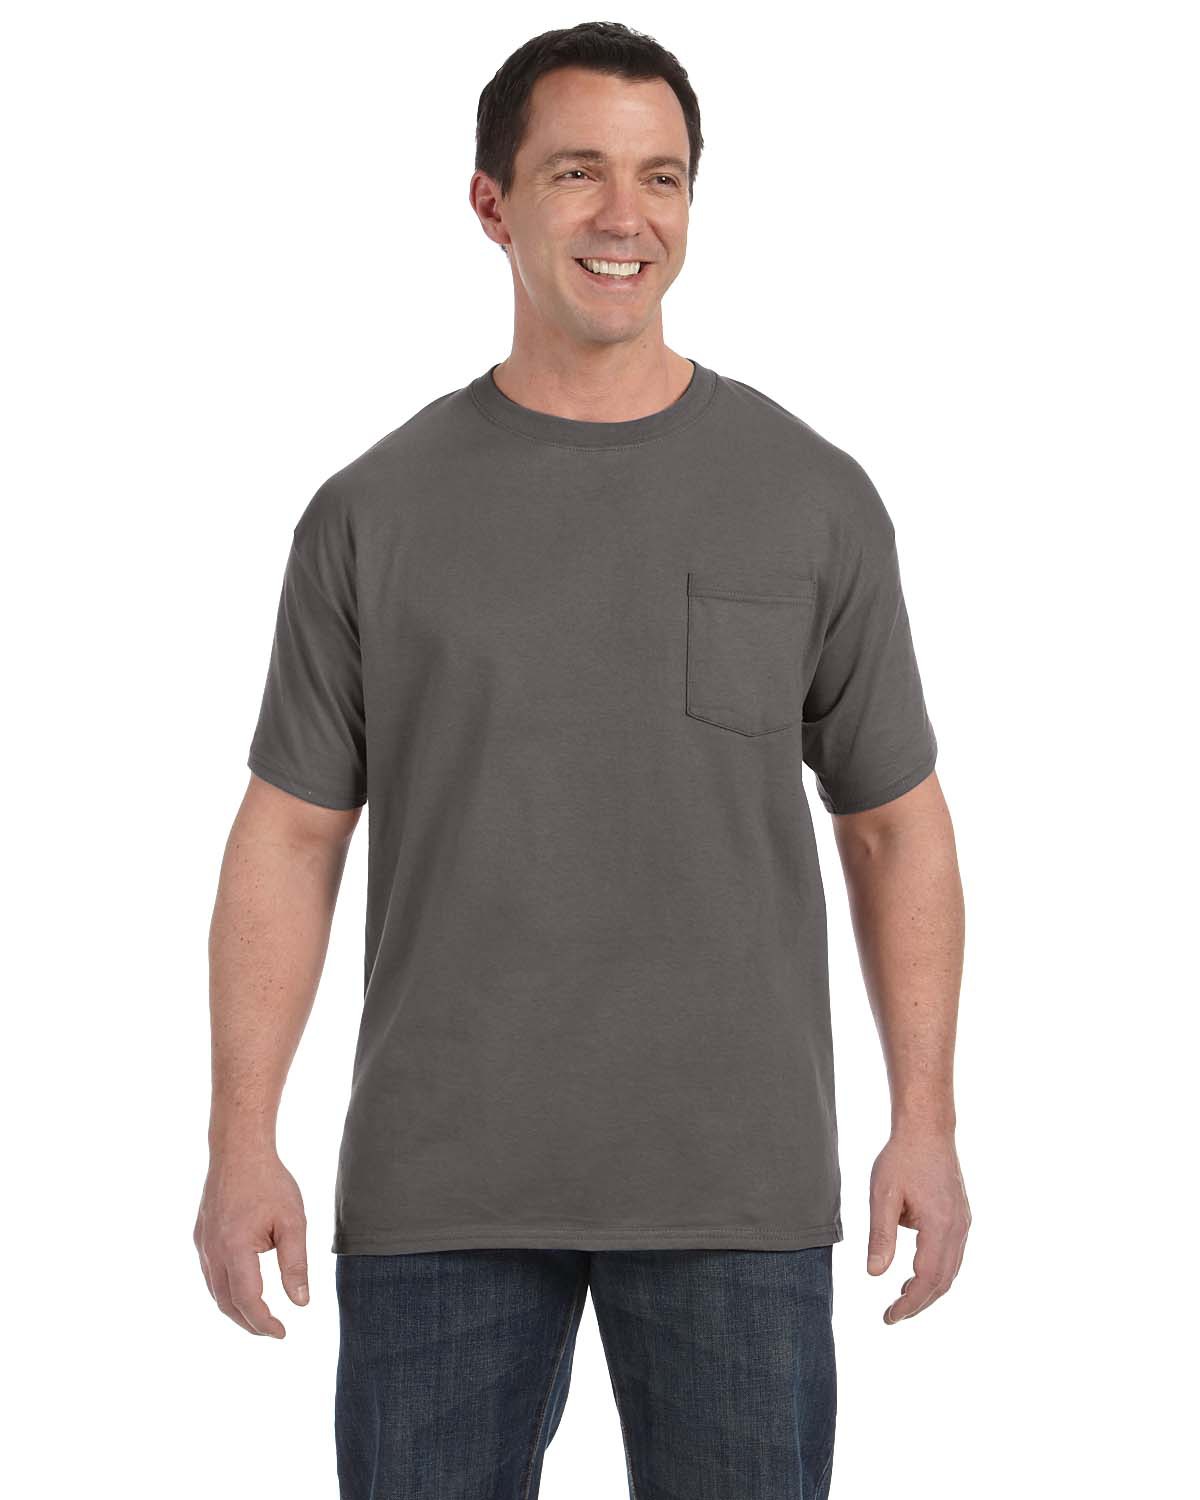 Hanes Adult Screen Printed Tagless 100% Cotton T-Shirt with Pocket